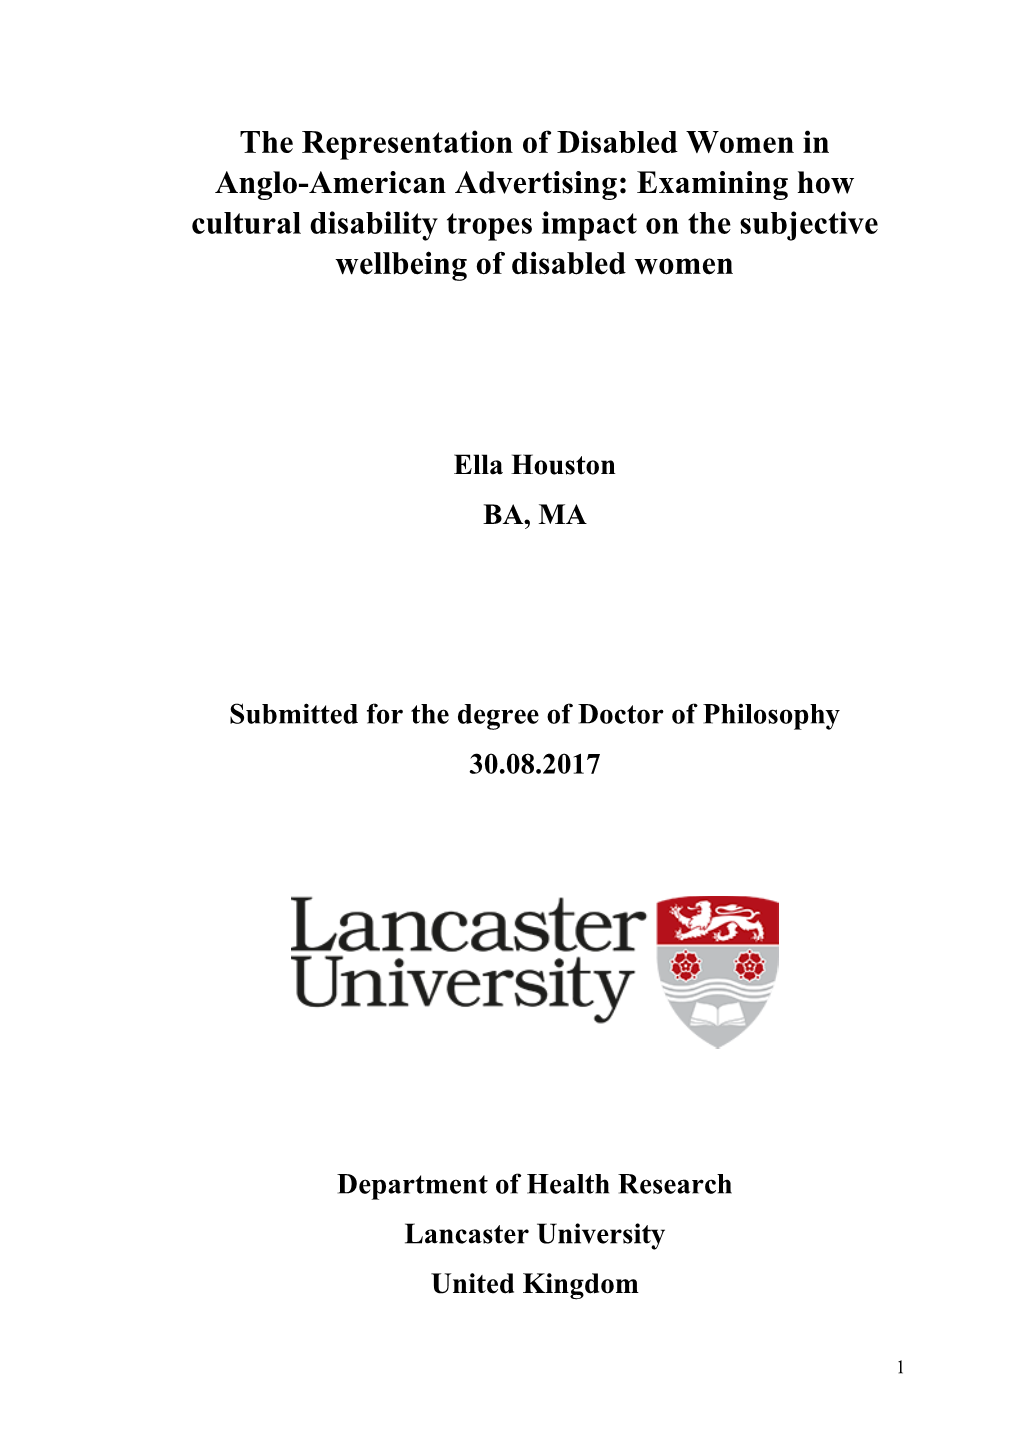 The Representation of Disabled Women in Anglo-American Advertising: Examining How Cultural Disability Tropes Impact on the Subjective Wellbeing of Disabled Women